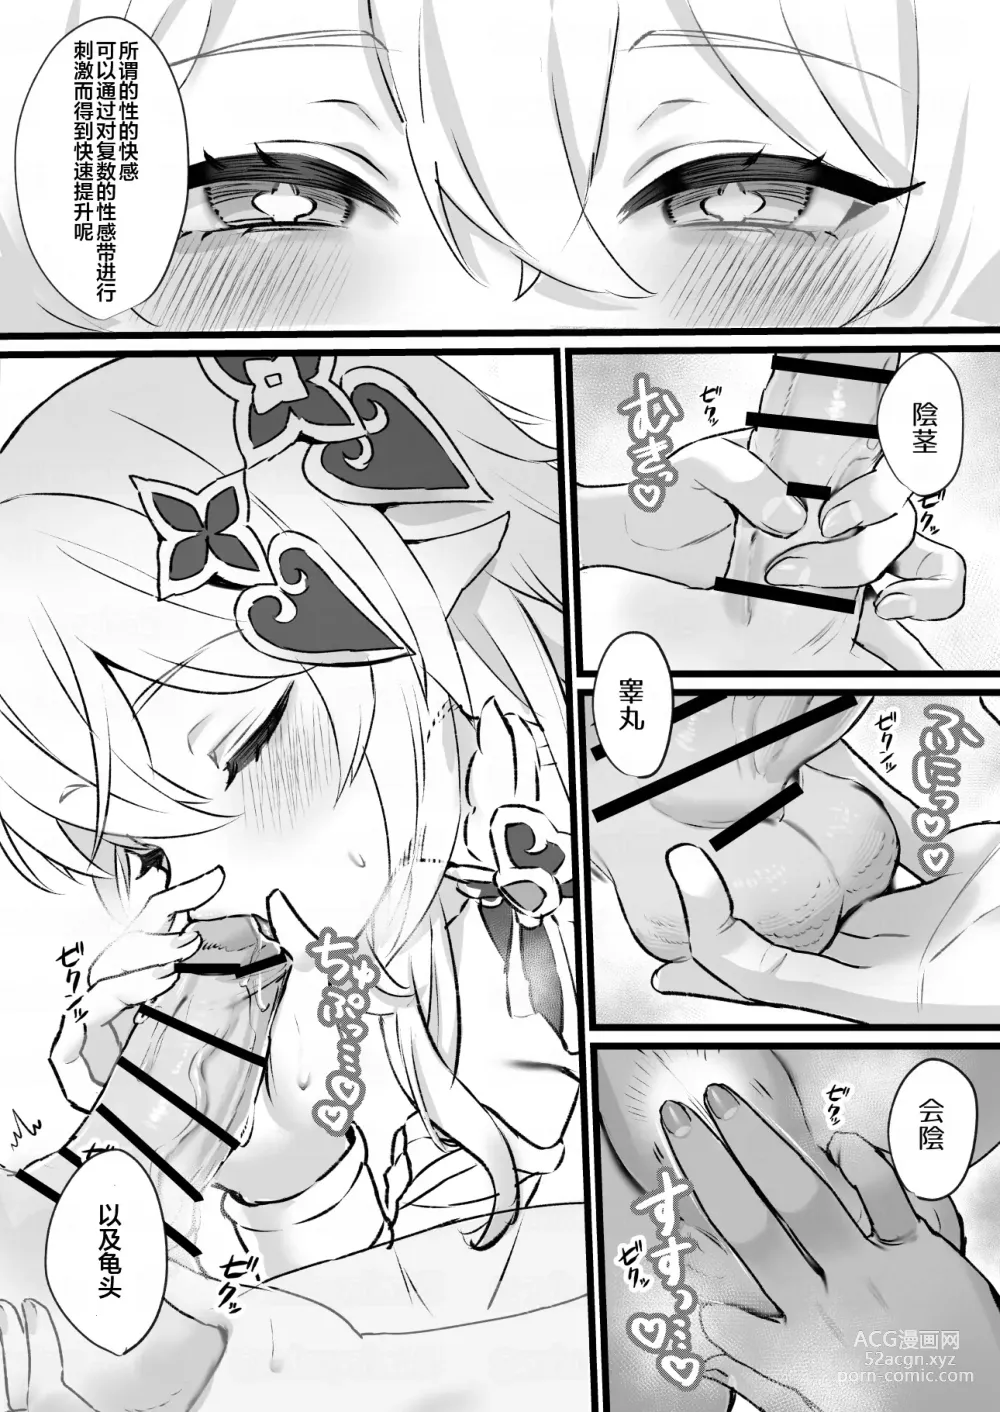 Page 4 of doujinshi 因为地脉异常草神的身体变成了大人